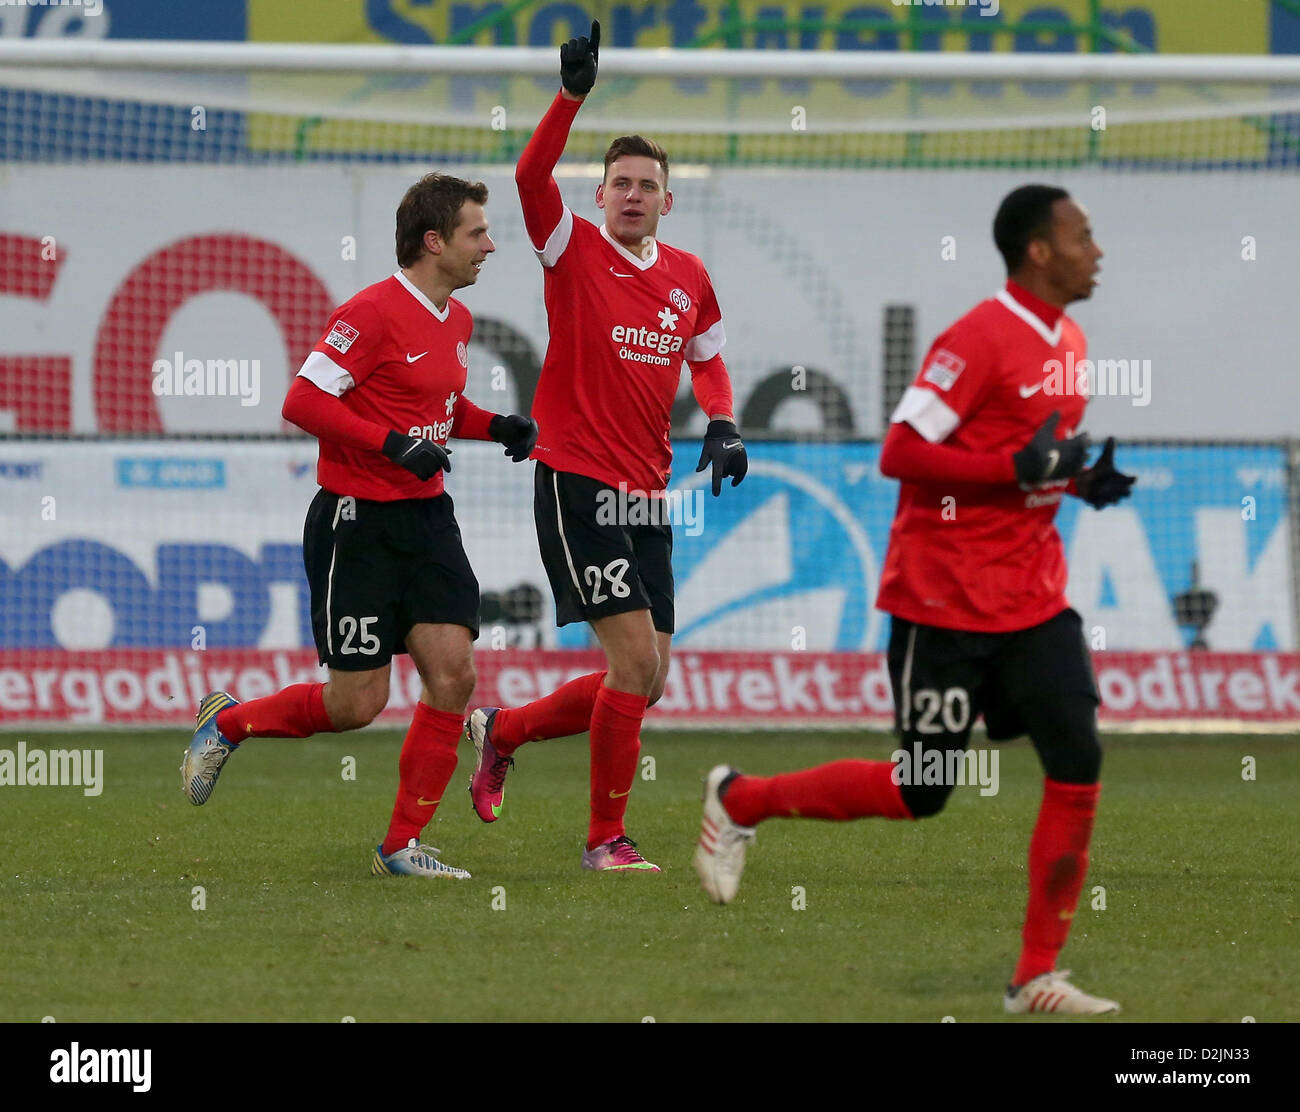 Fuerth, Germany. 26th January 2013. Mainz's Adam Szalai (C) celebrates his 0-1 goal with teammates Andreas Ivanschitz (L) and Junior Diaz during the Bundesliga soccer match between SpVgg Greuther Fuerth and FSV Mainz 05 at Trolli Arena in Fuerth, Germany. Credit:  dpa picture alliance / Alamy Live News Stock Photo